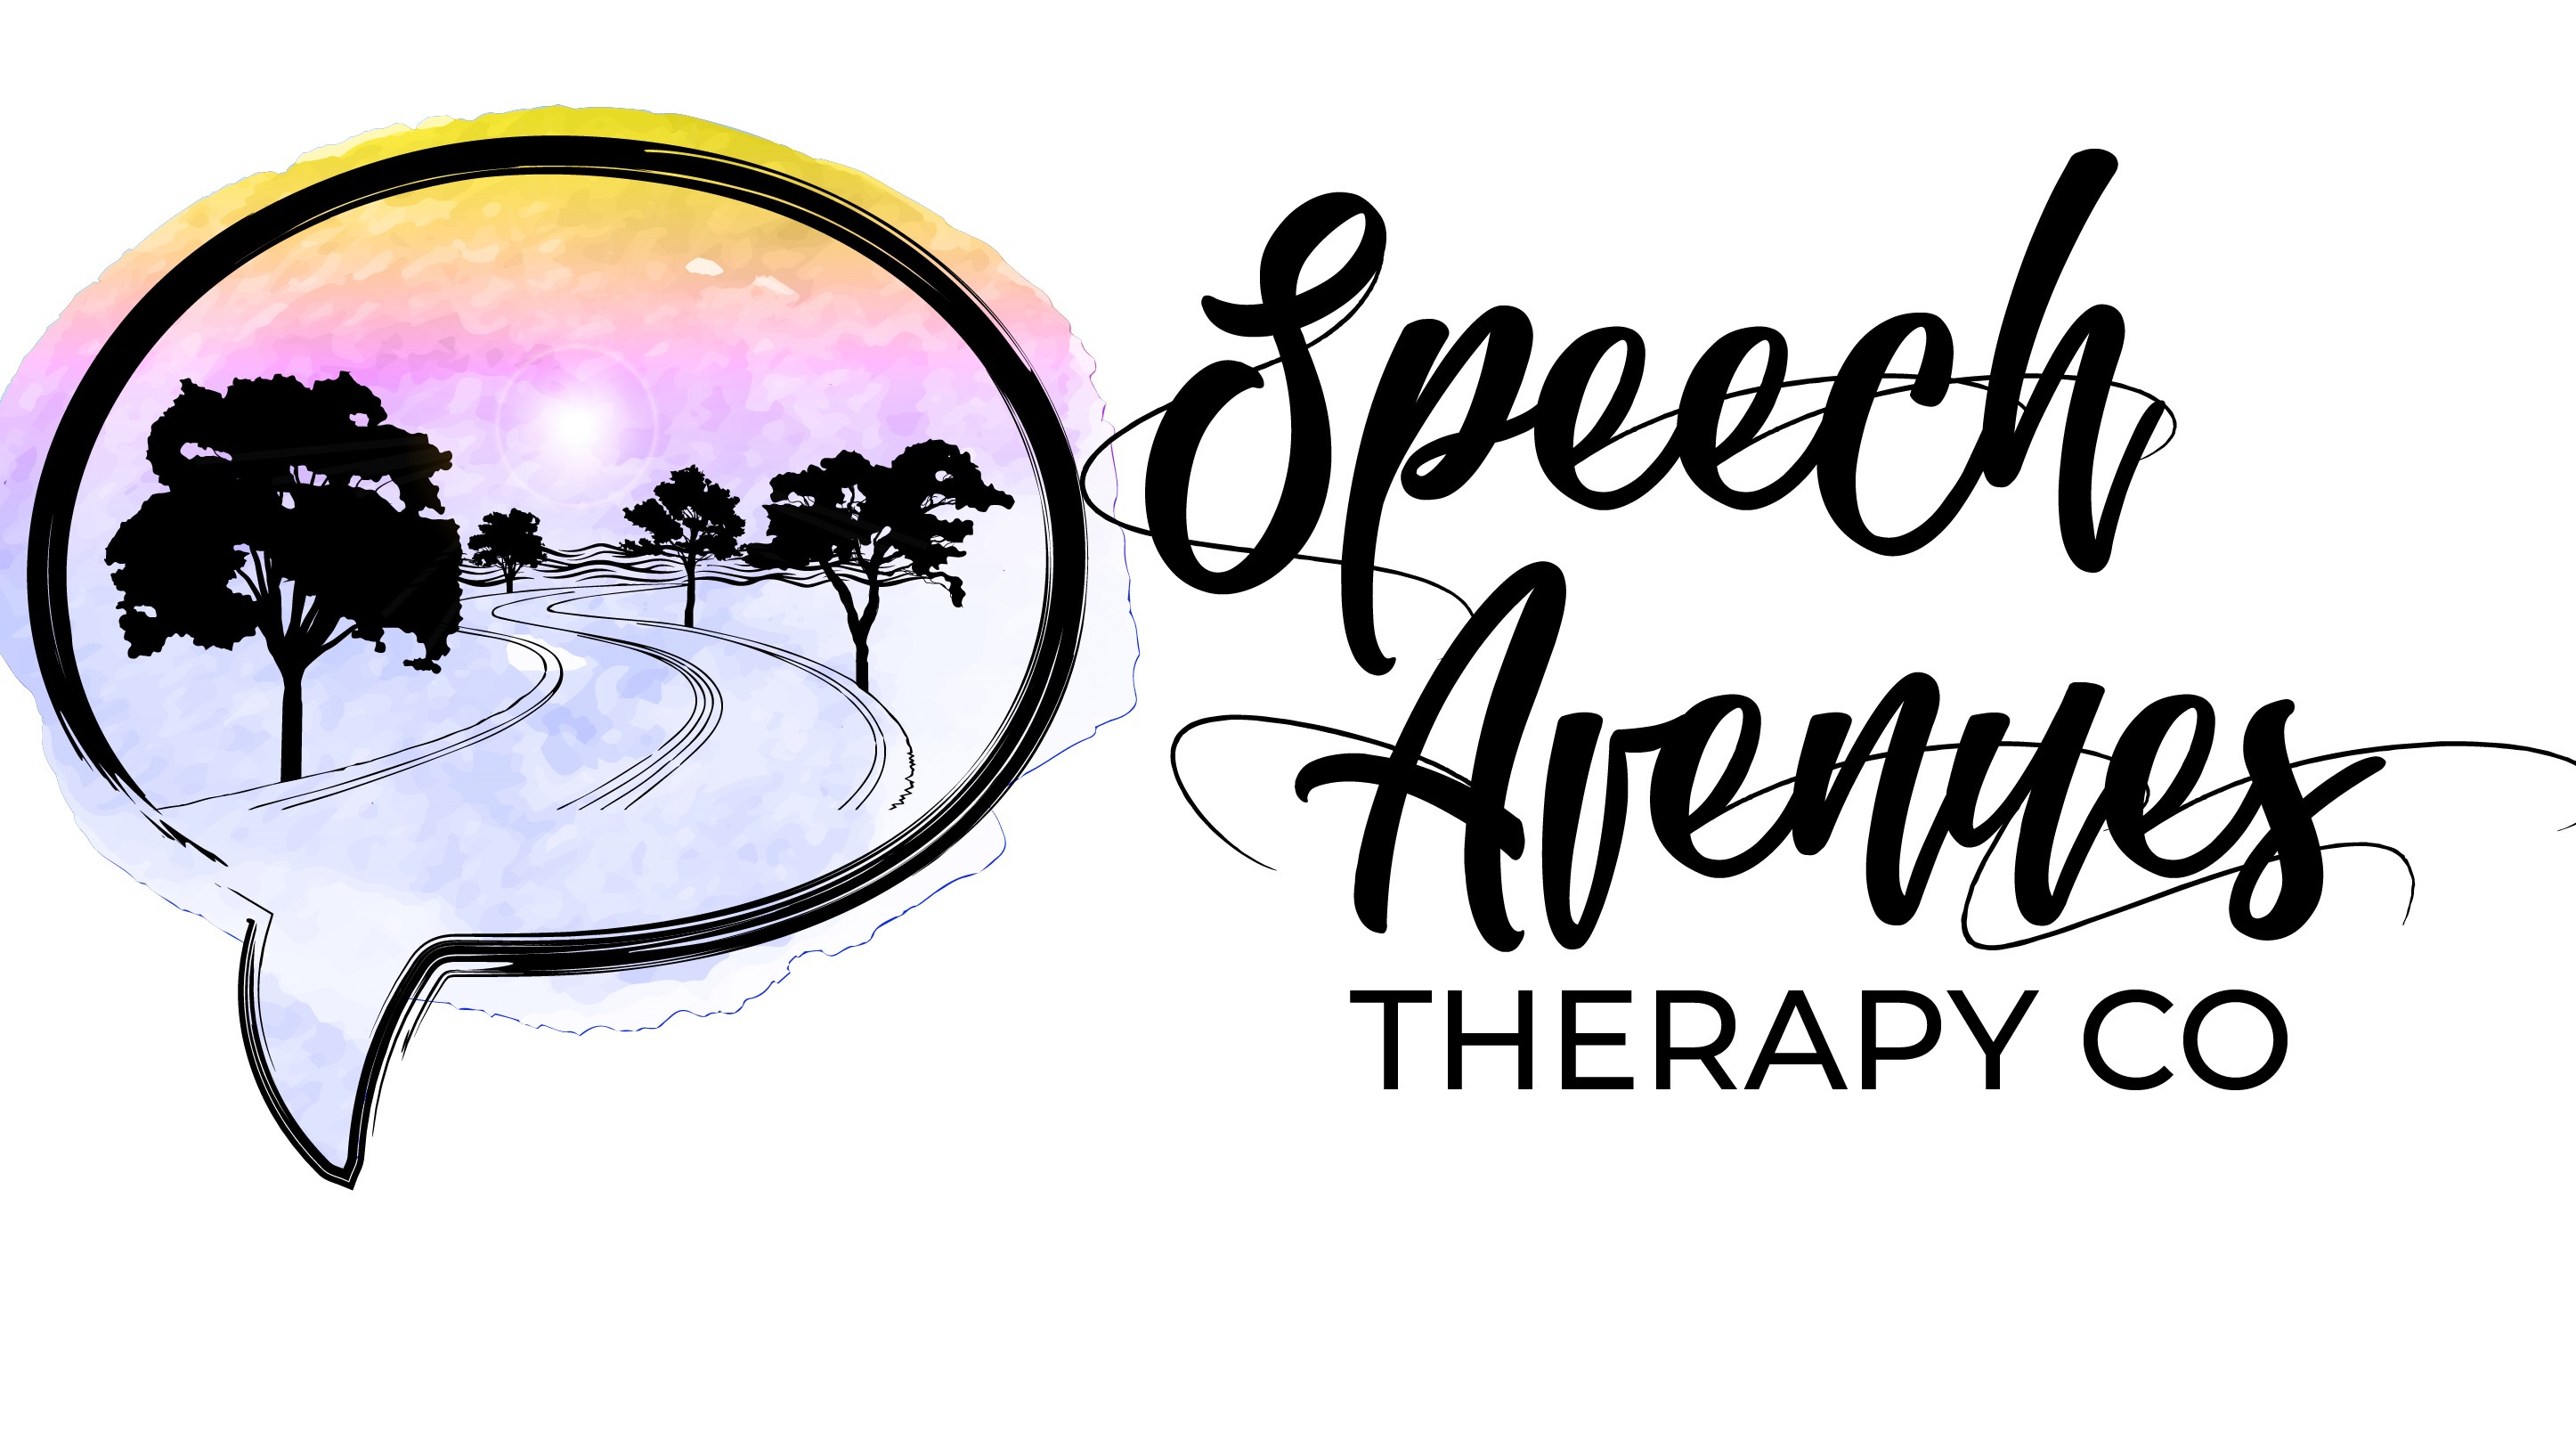 Speech Avenues Therapy Co logo